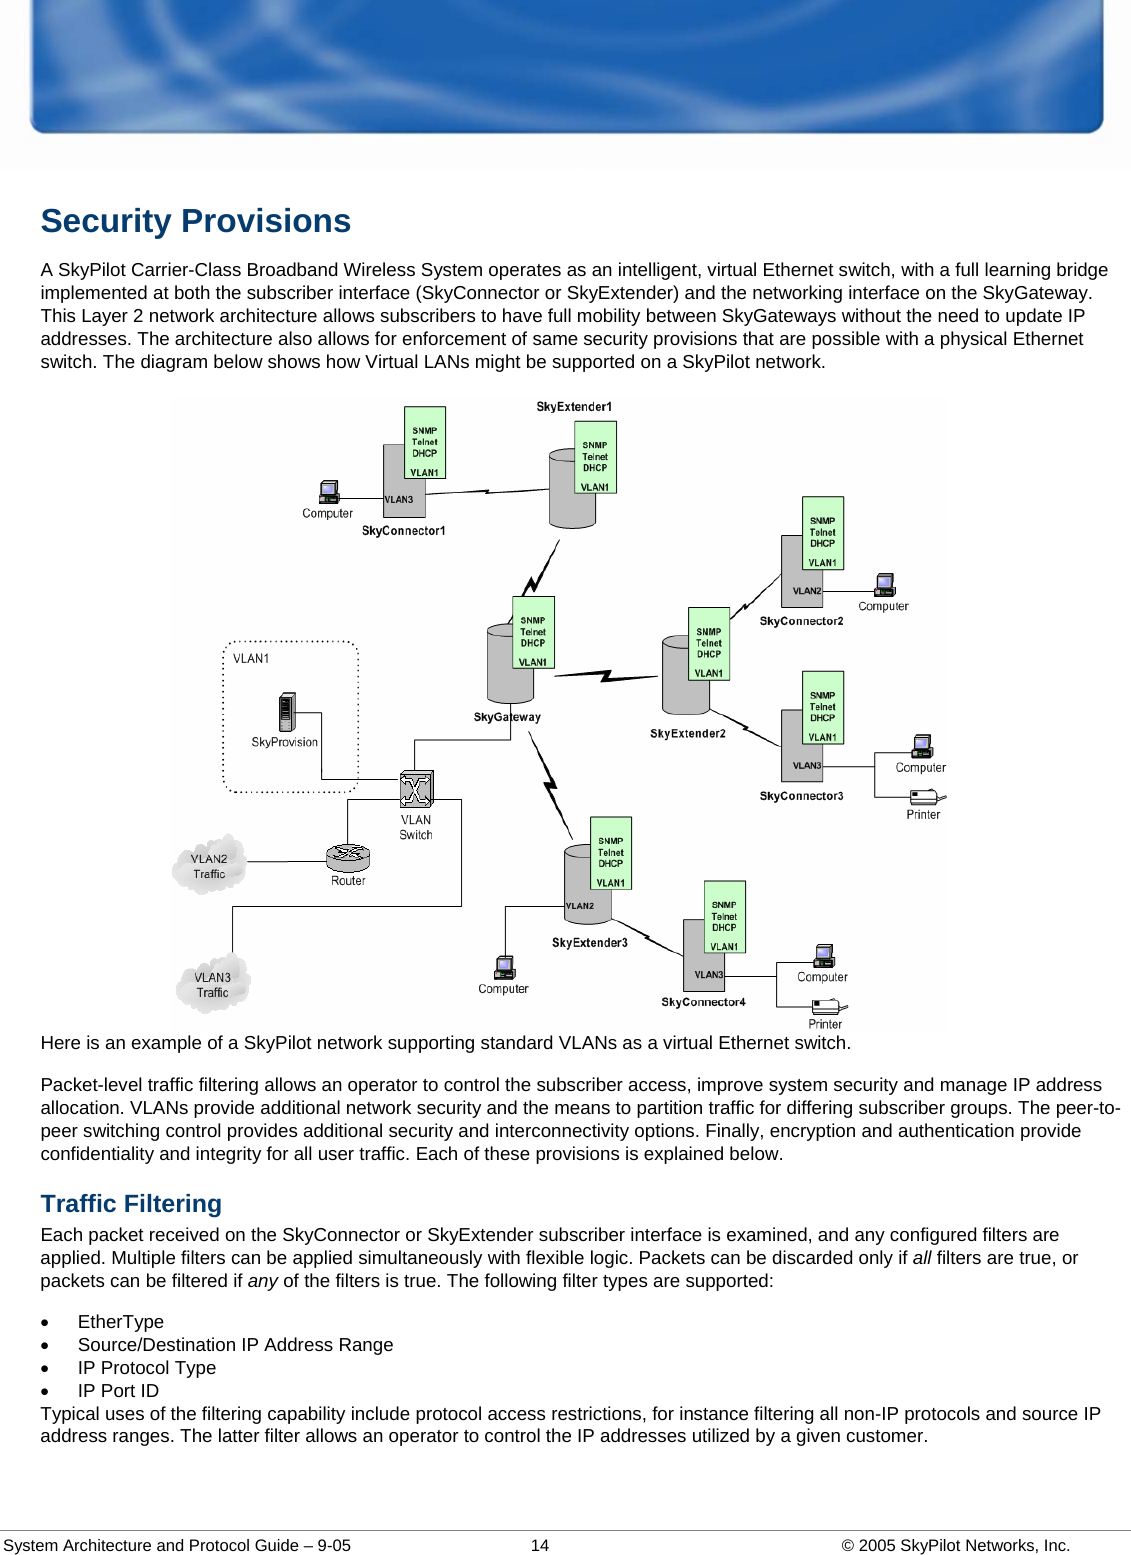  System Architecture and Protocol Guide – 9-05  14  © 2005 SkyPilot Networks, Inc. Security Provisions  A SkyPilot Carrier-Class Broadband Wireless System operates as an intelligent, virtual Ethernet switch, with a full learning bridge implemented at both the subscriber interface (SkyConnector or SkyExtender) and the networking interface on the SkyGateway. This Layer 2 network architecture allows subscribers to have full mobility between SkyGateways without the need to update IP addresses. The architecture also allows for enforcement of same security provisions that are possible with a physical Ethernet switch. The diagram below shows how Virtual LANs might be supported on a SkyPilot network.  Here is an example of a SkyPilot network supporting standard VLANs as a virtual Ethernet switch.  Packet-level traffic filtering allows an operator to control the subscriber access, improve system security and manage IP address allocation. VLANs provide additional network security and the means to partition traffic for differing subscriber groups. The peer-to-peer switching control provides additional security and interconnectivity options. Finally, encryption and authentication provide confidentiality and integrity for all user traffic. Each of these provisions is explained below.  Traffic Filtering Each packet received on the SkyConnector or SkyExtender subscriber interface is examined, and any configured filters are applied. Multiple filters can be applied simultaneously with flexible logic. Packets can be discarded only if all filters are true, or packets can be filtered if any of the filters is true. The following filter types are supported: • EtherType •  Source/Destination IP Address Range •  IP Protocol Type •  IP Port ID Typical uses of the filtering capability include protocol access restrictions, for instance filtering all non-IP protocols and source IP address ranges. The latter filter allows an operator to control the IP addresses utilized by a given customer.  